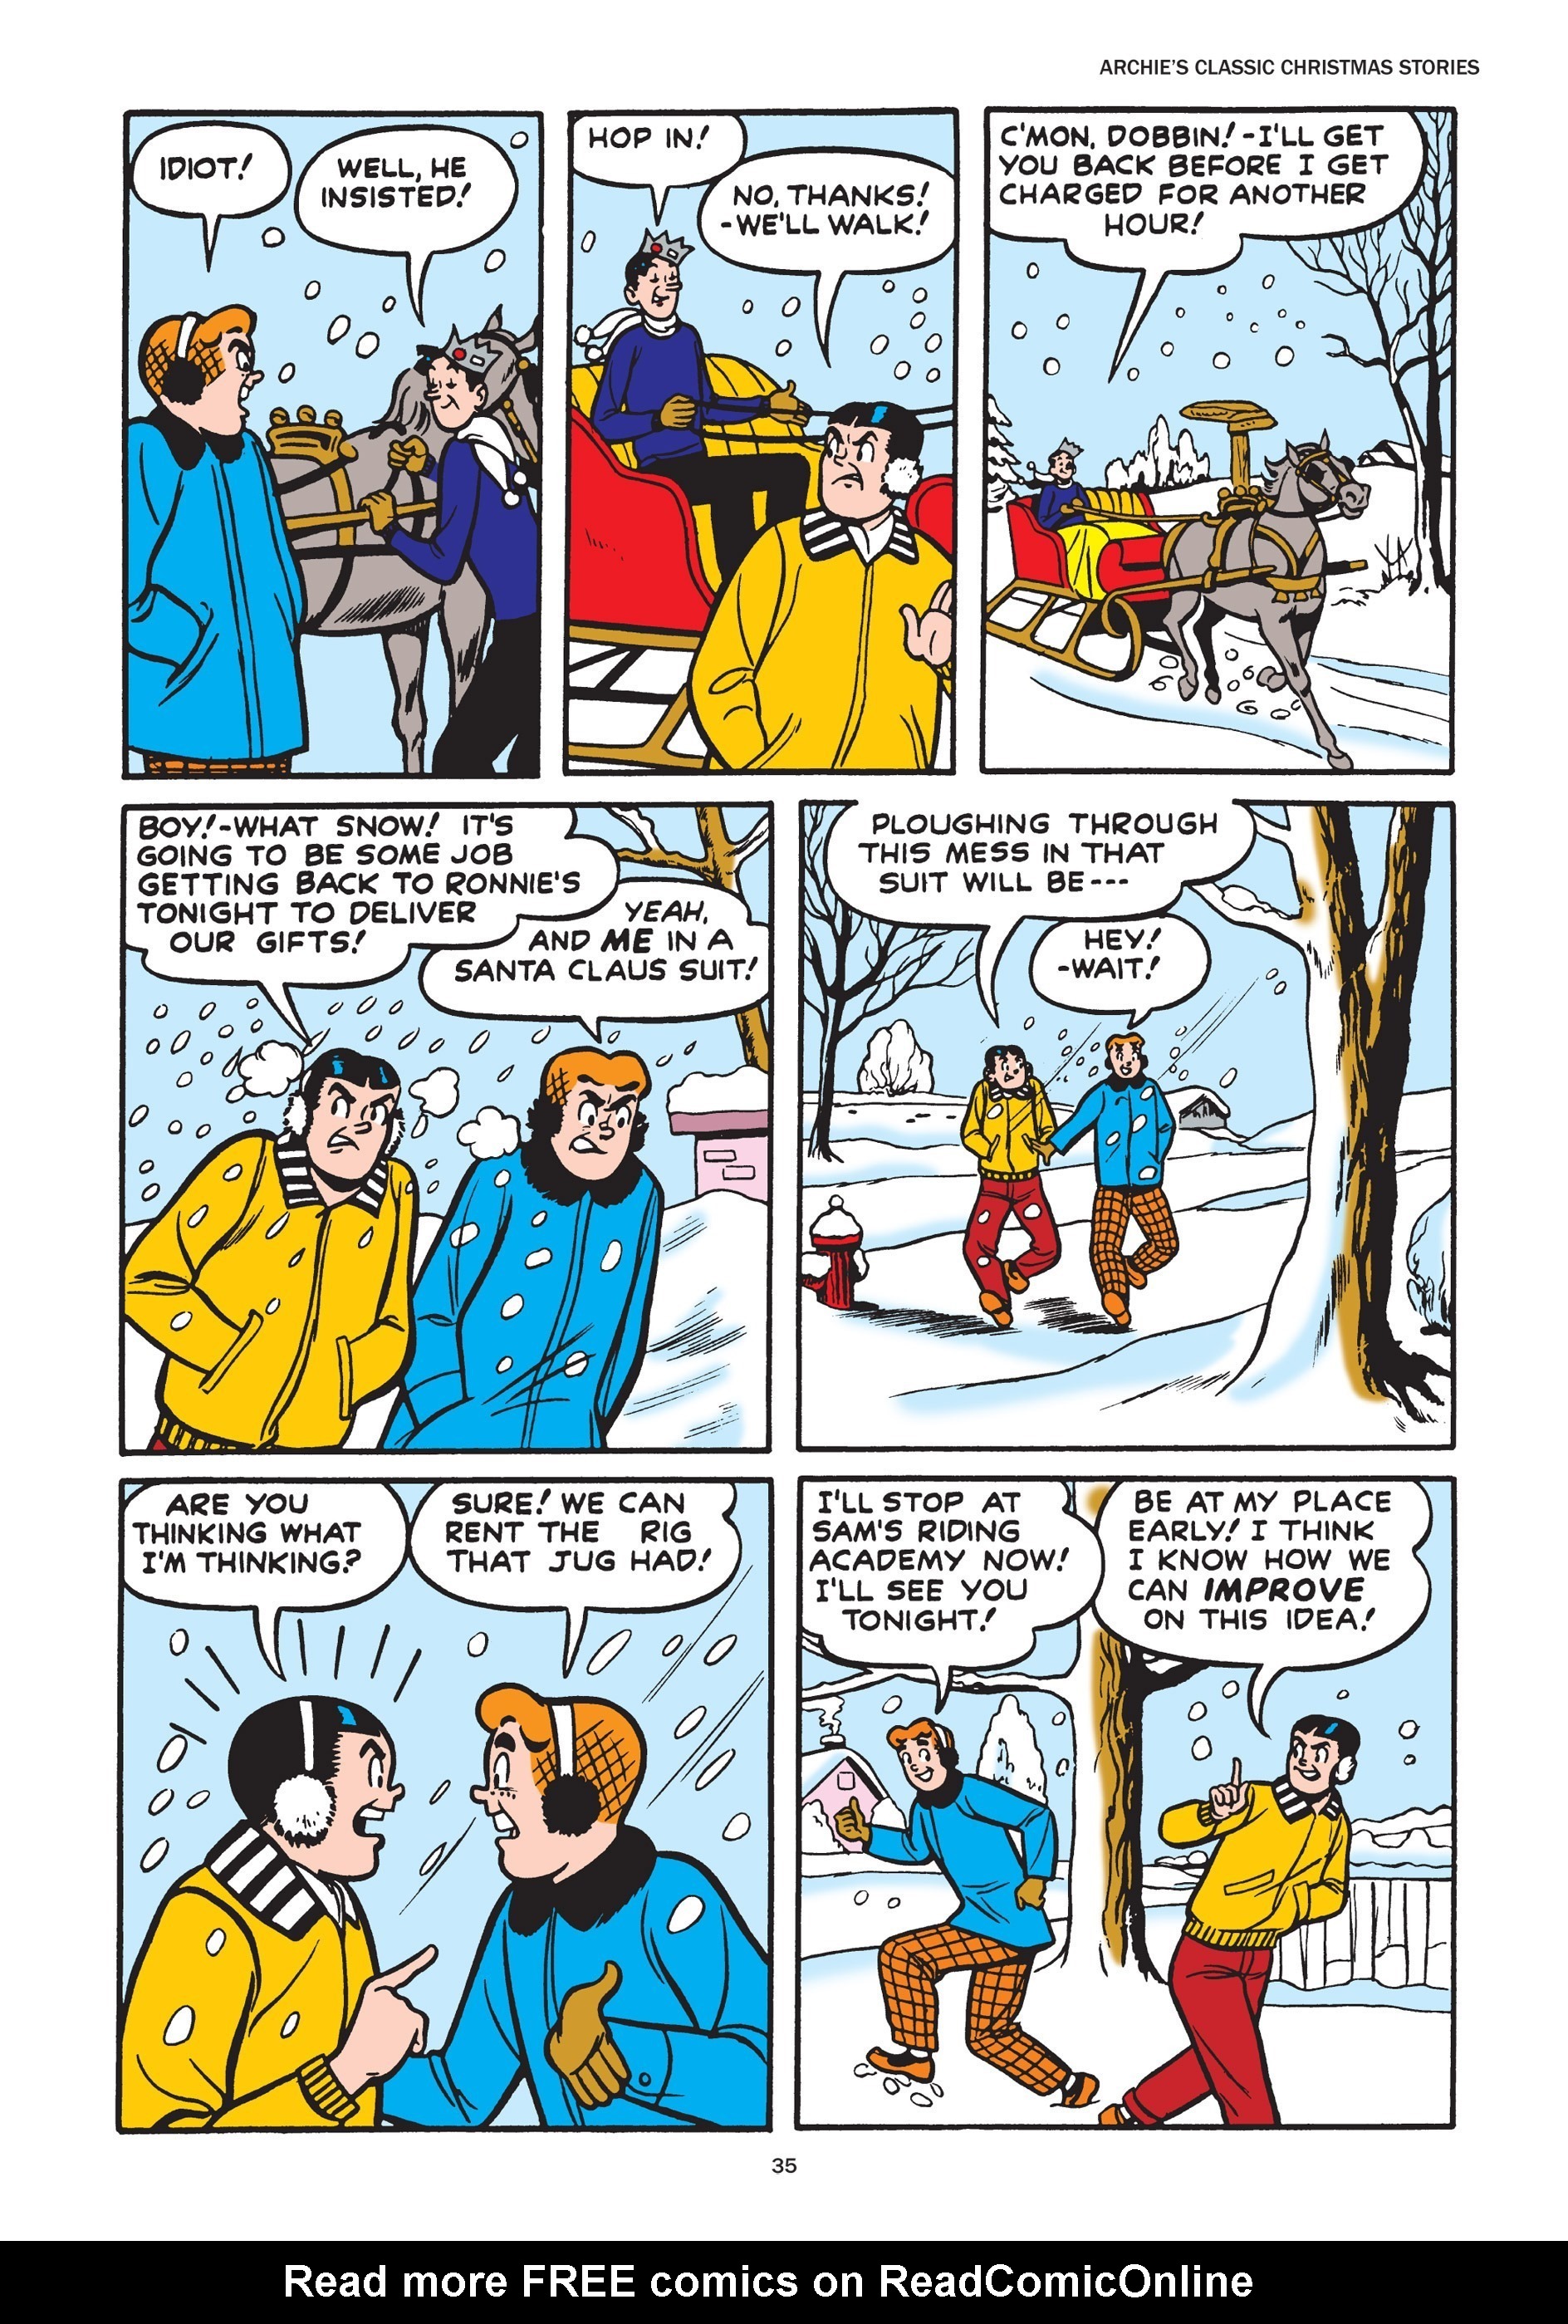 Read online Archie's Classic Christmas Stories comic -  Issue # TPB - 36